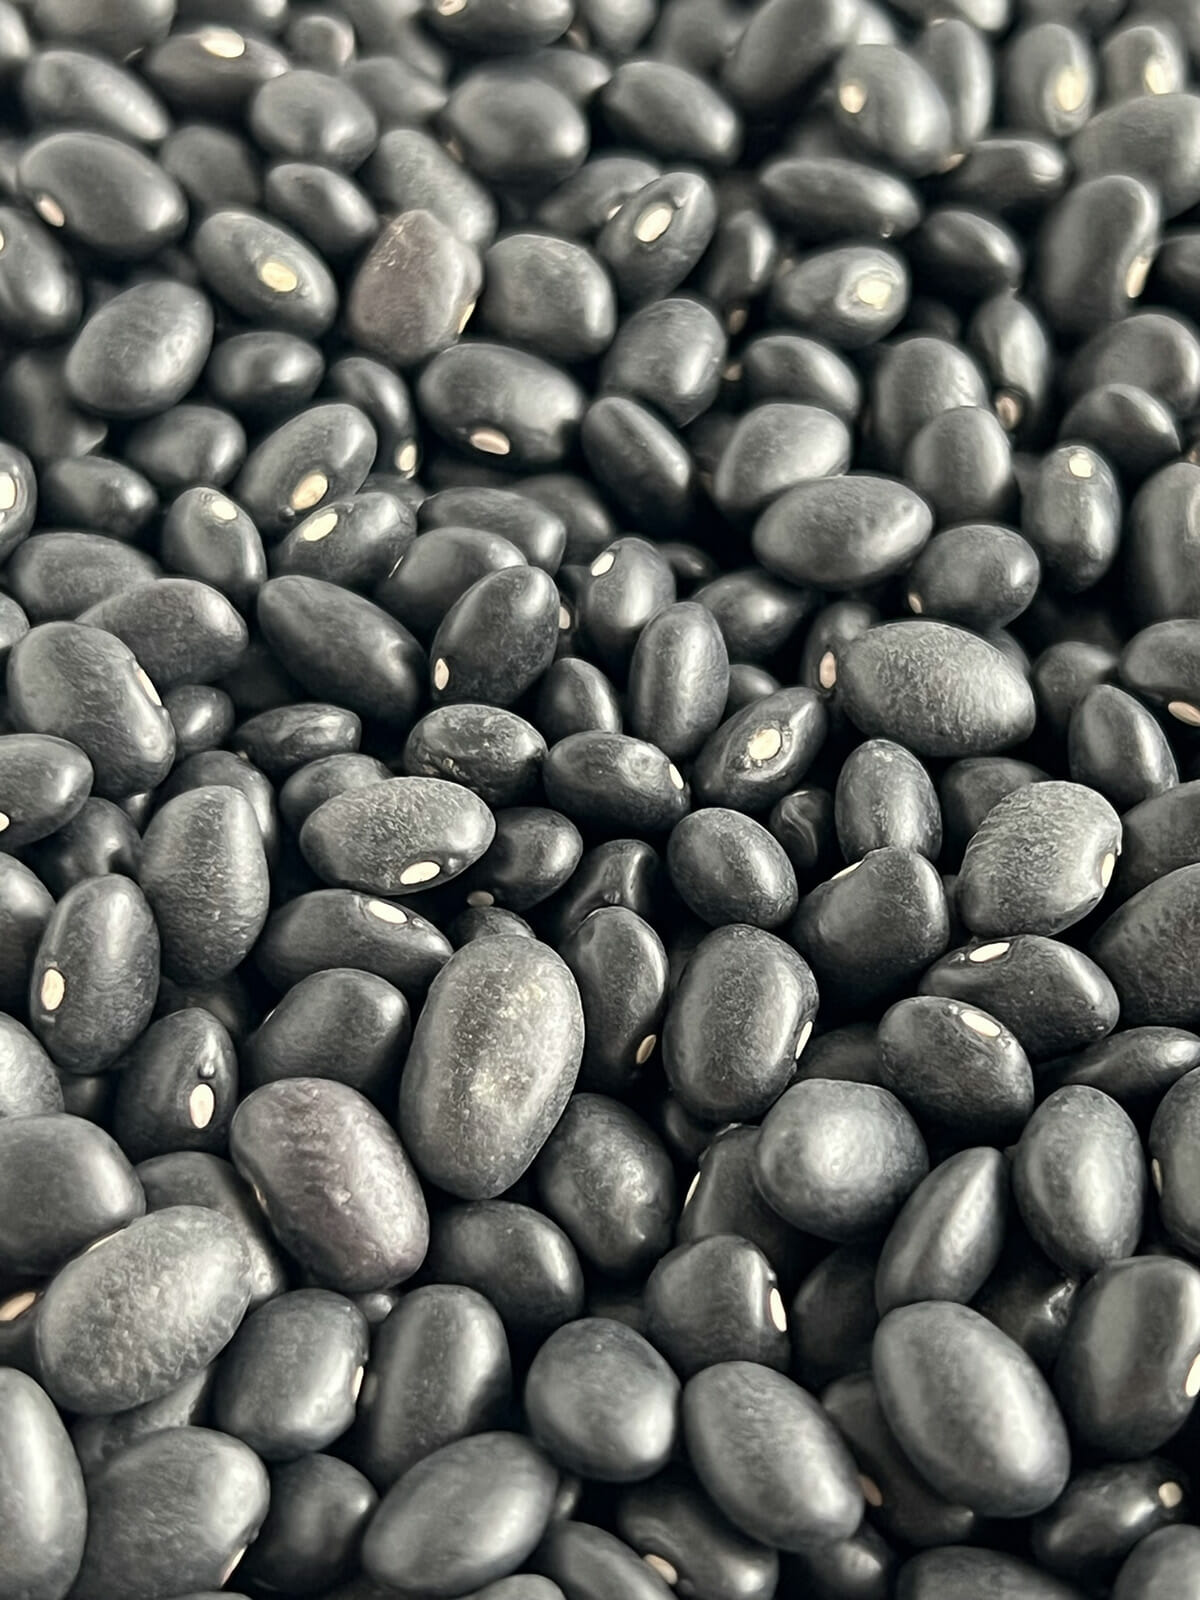 Dried black beans ready to be made in an Instant Pot pressure cooker.